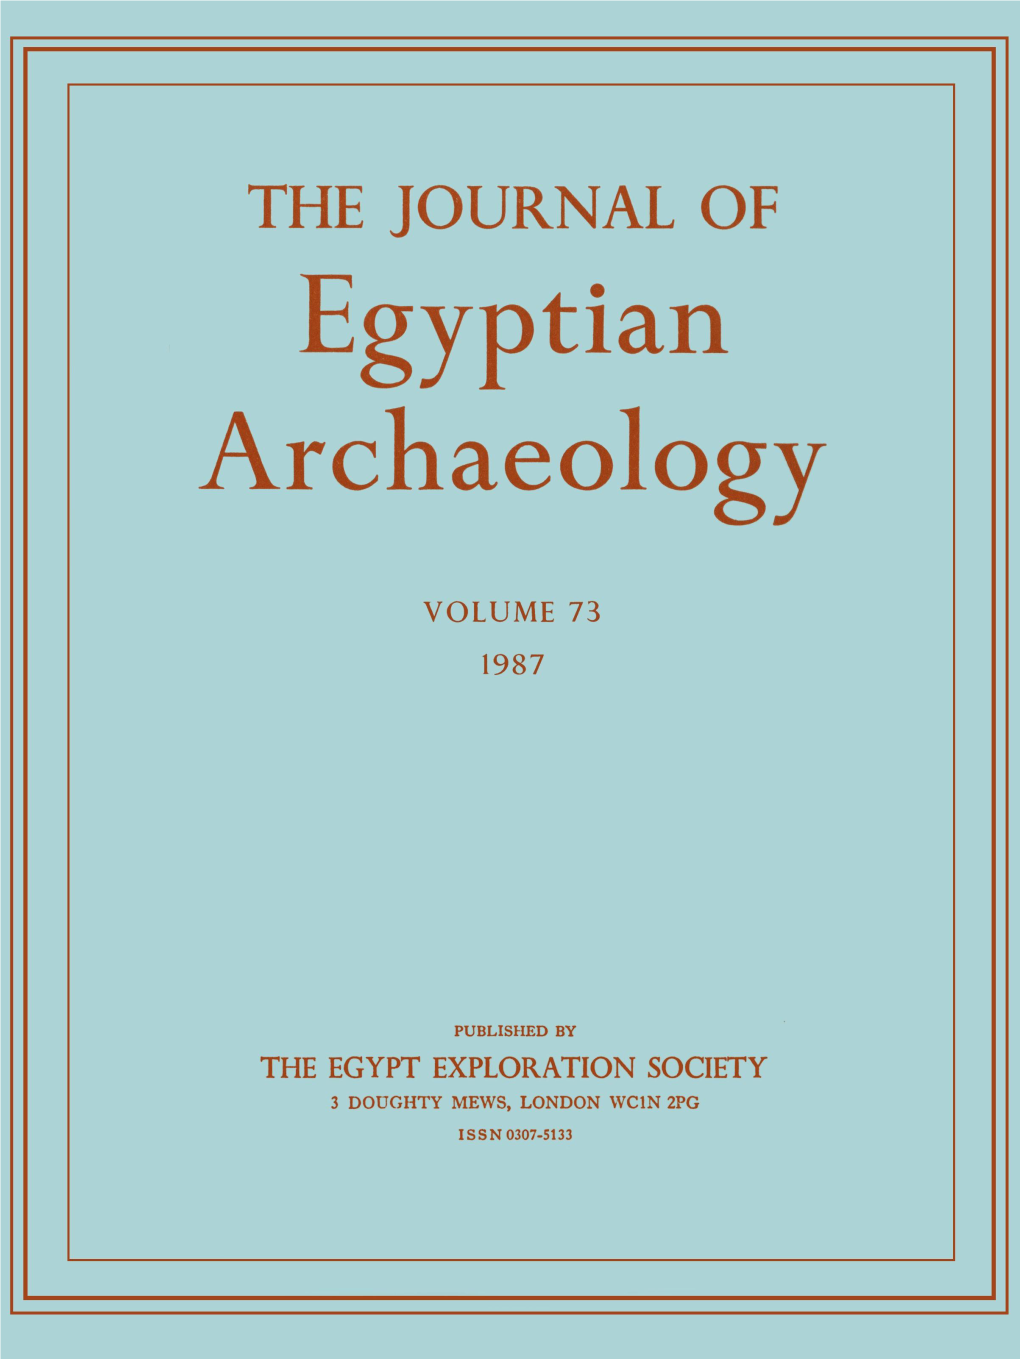 Journal of Egyptian Archaeology, Vol. 73, 1987